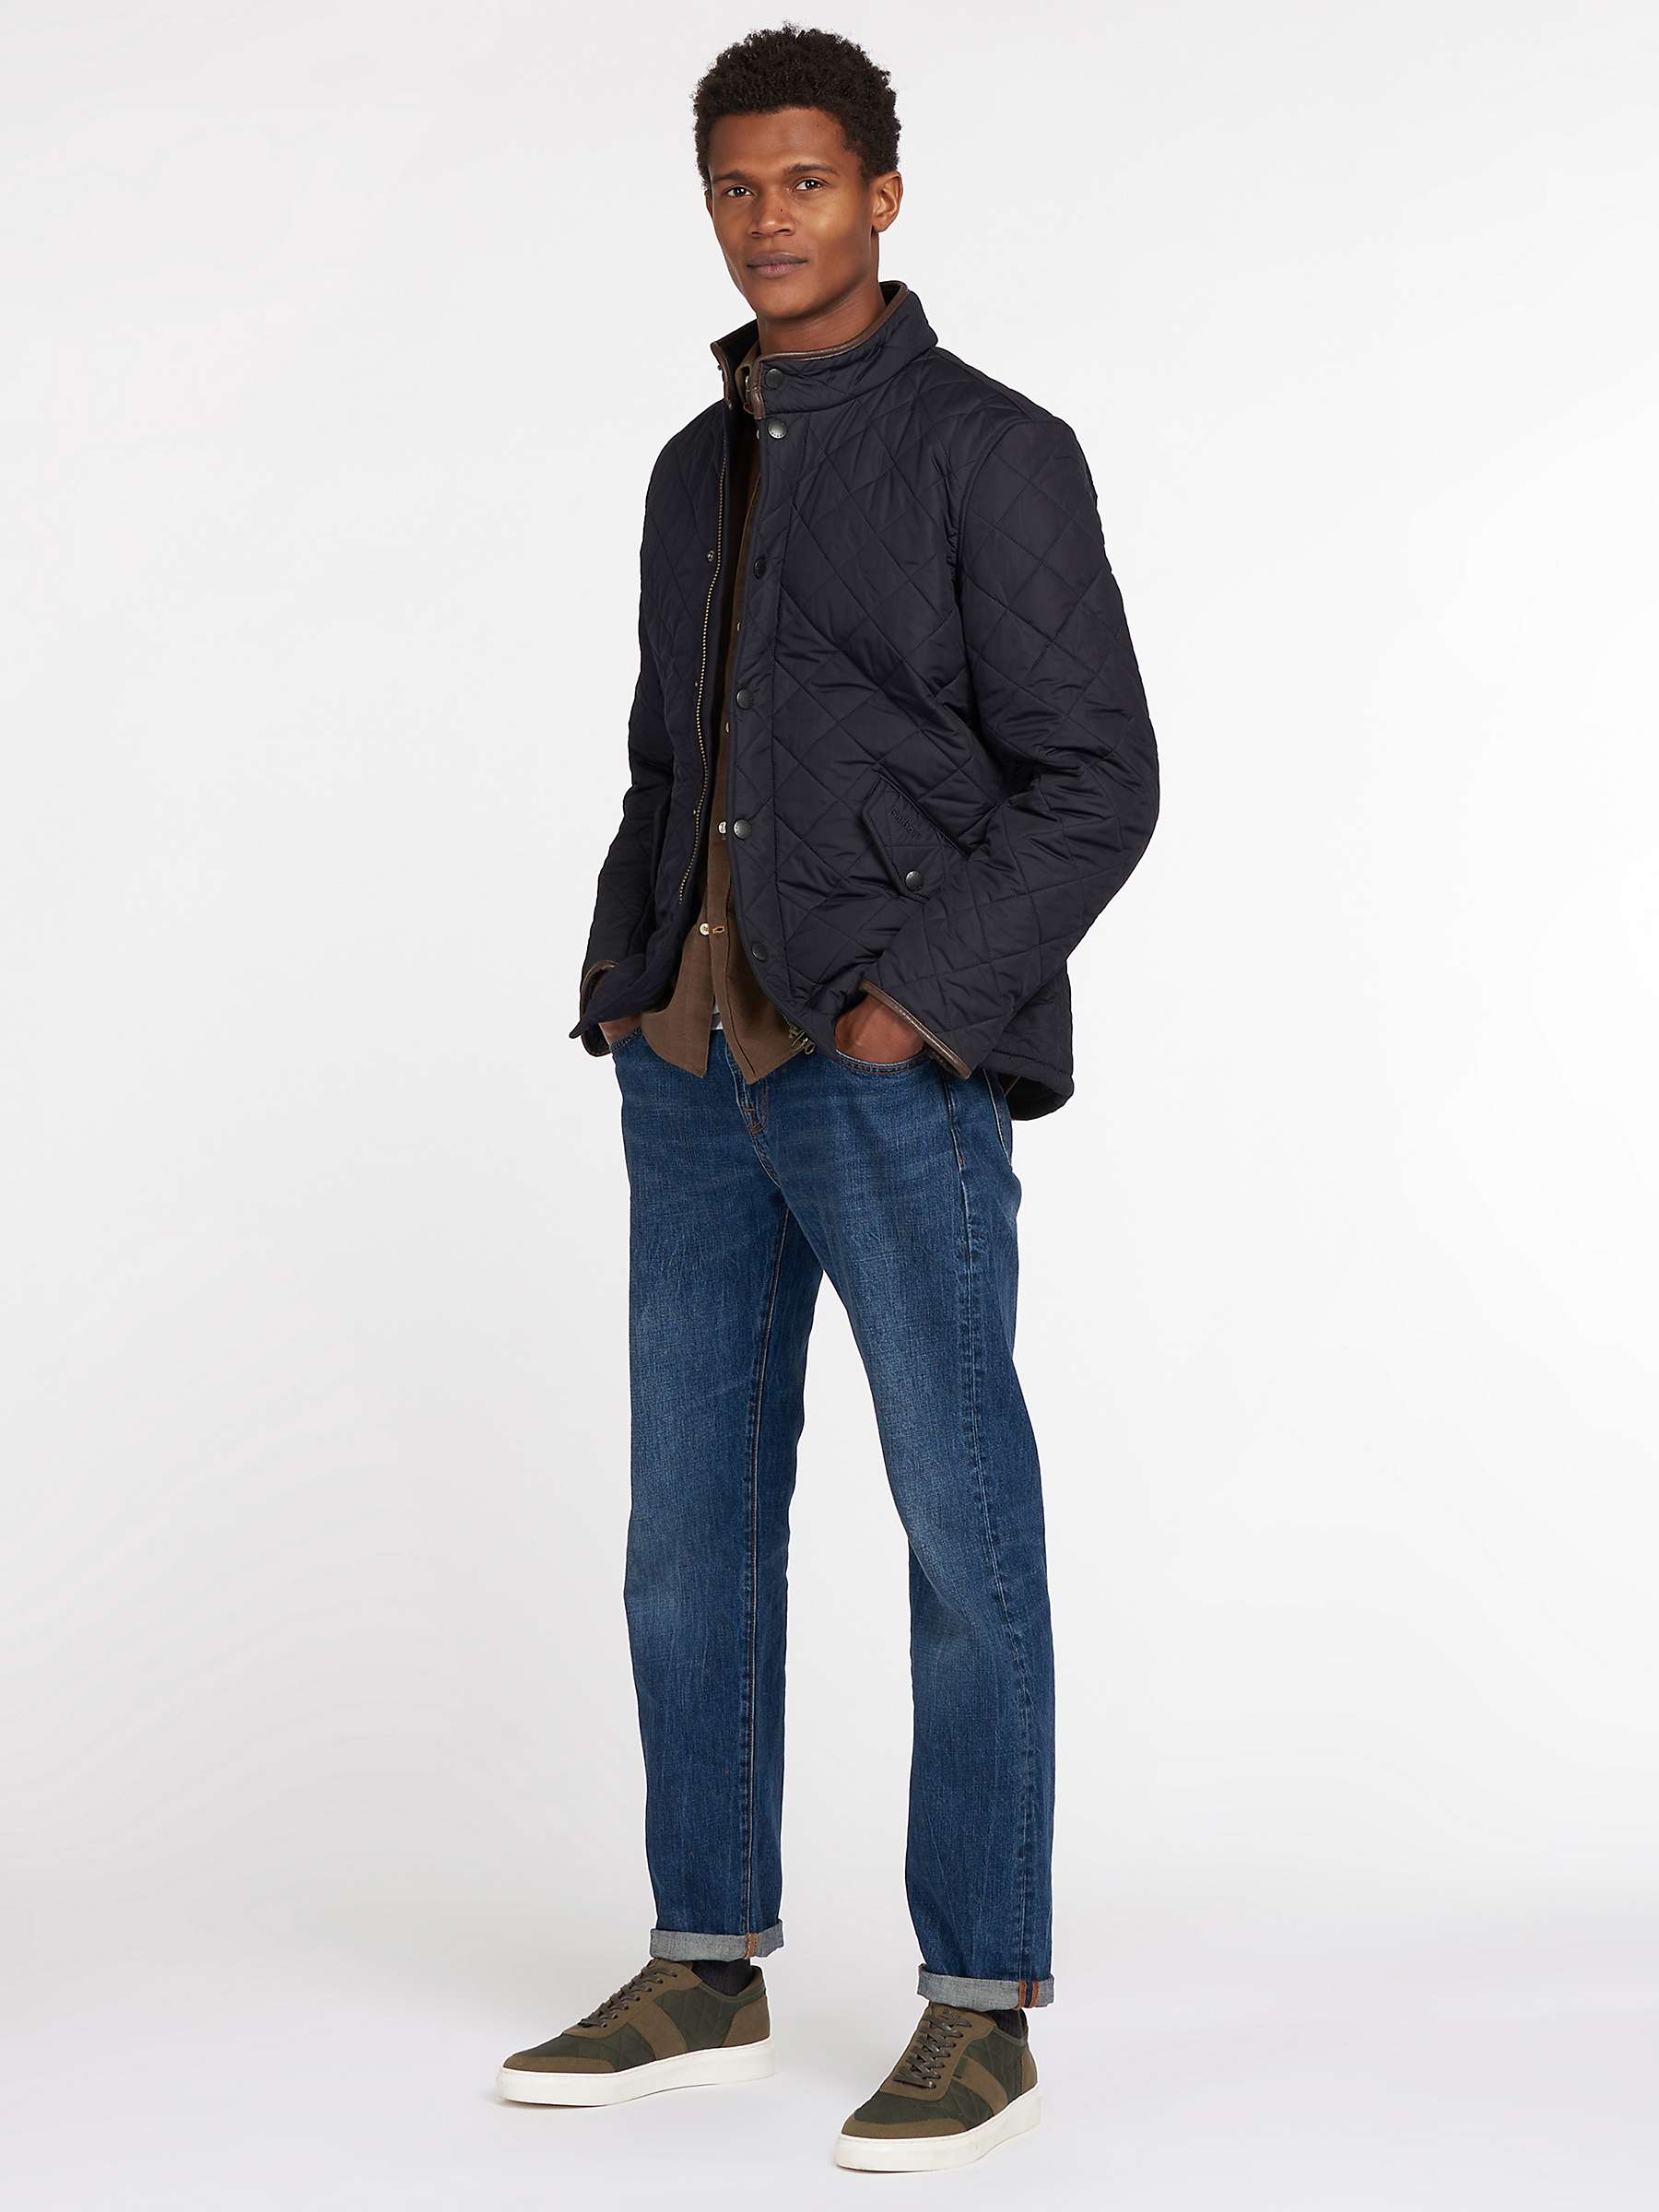 Buy Barbour Powell Quilted Jacket Online at johnlewis.com